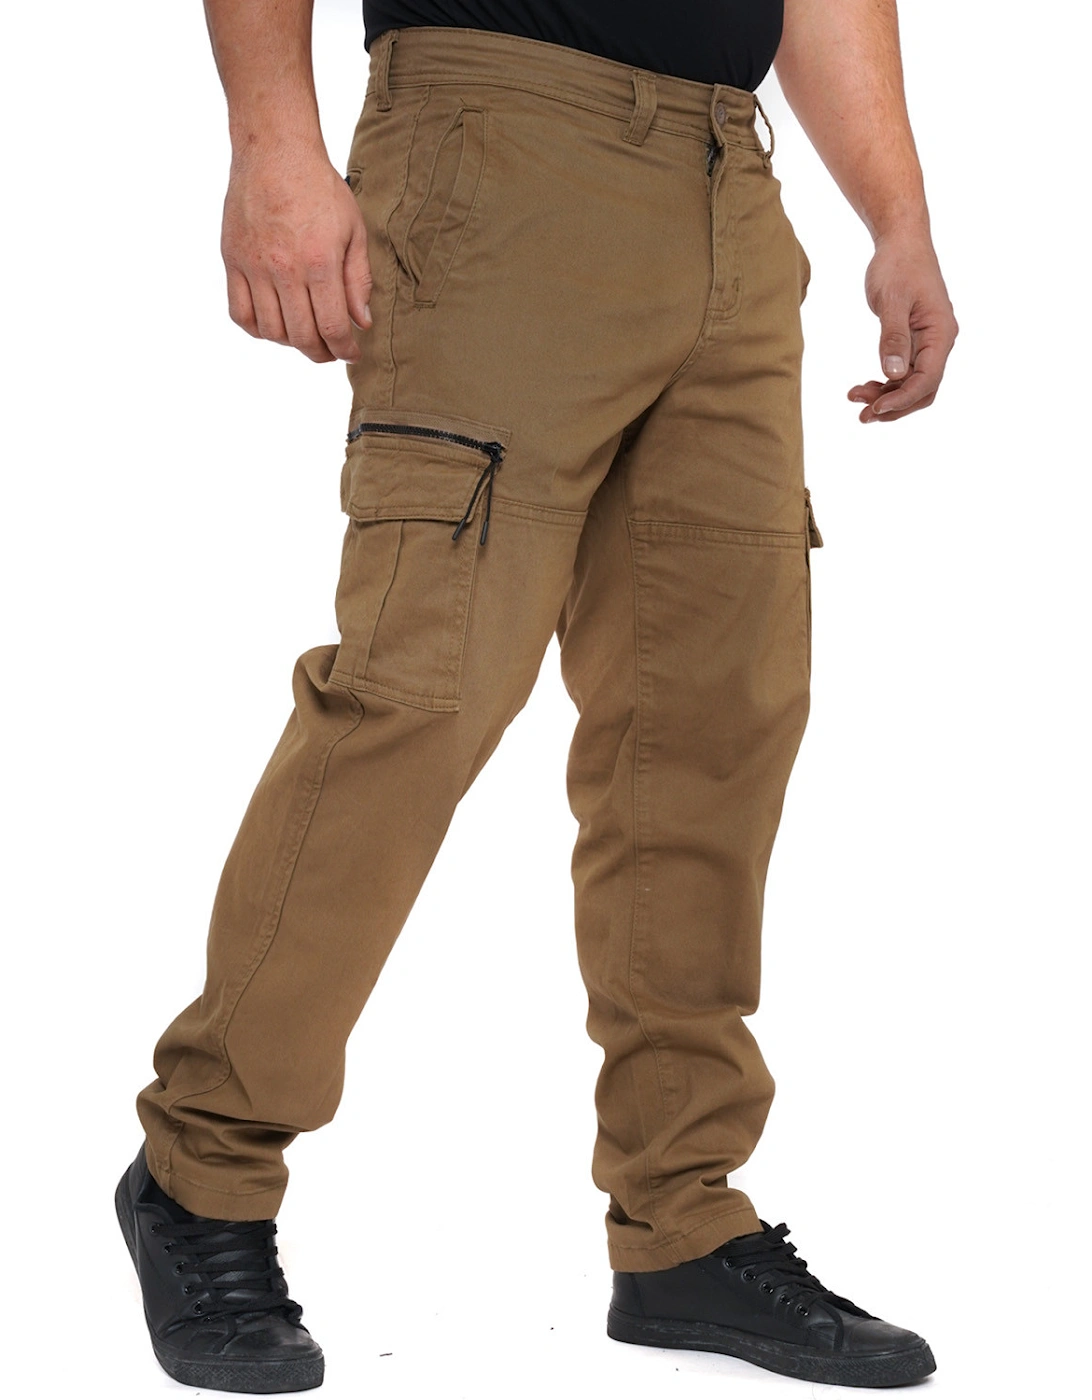 DML Mens Mayfield Cargo Pants (Army)